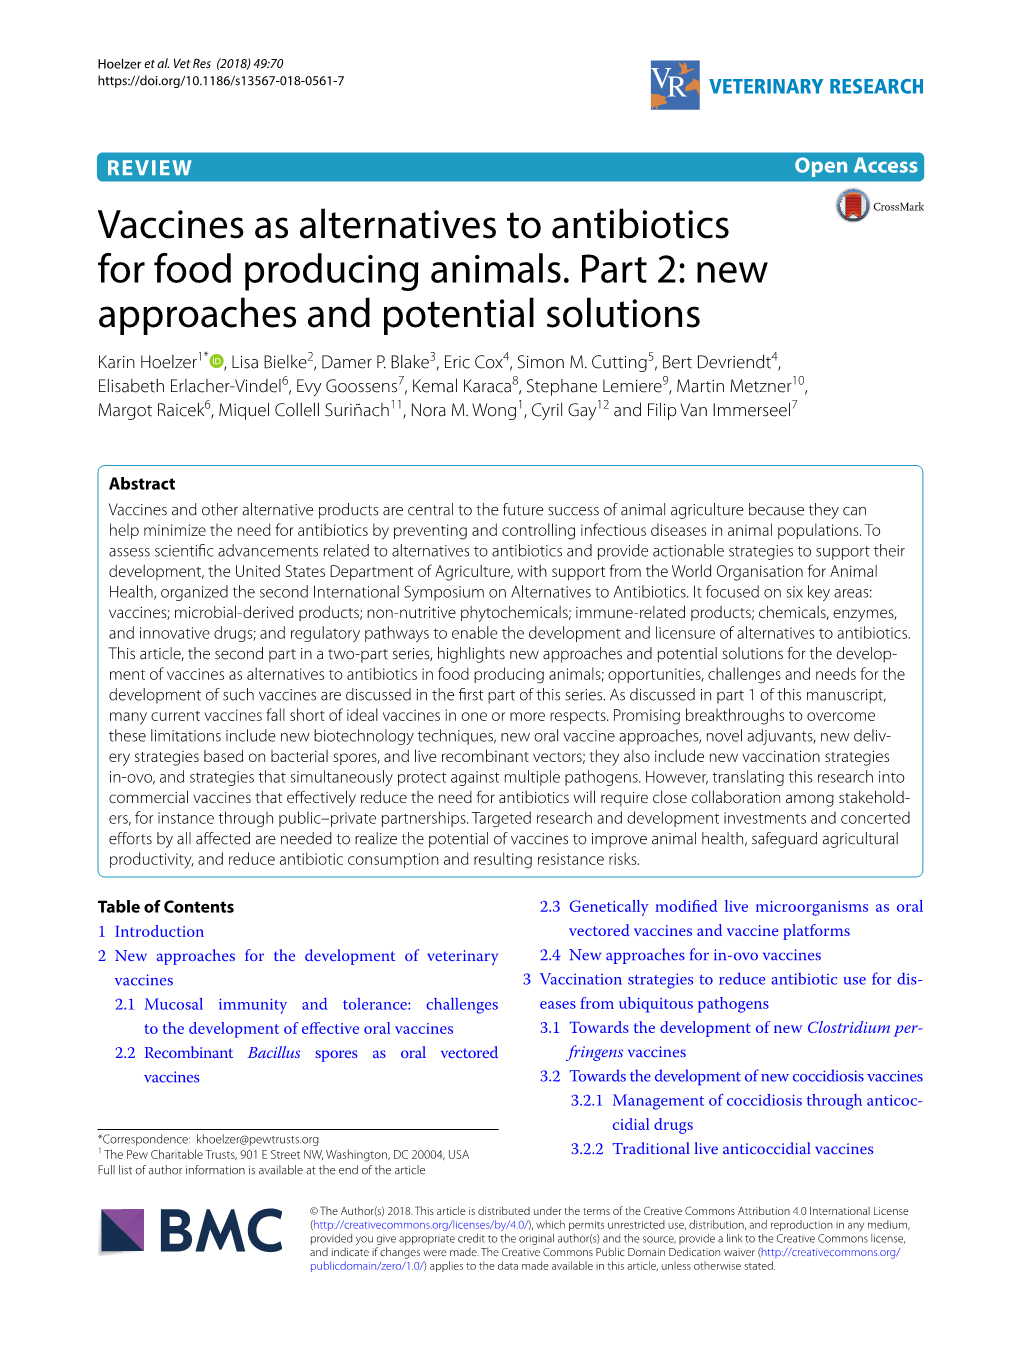 Vaccines As Alternatives to Antibiotics for Food Producing Animals. Part 2: New Approaches and Potential Solutions Karin Hoelzer1* , Lisa Bielke2, Damer P